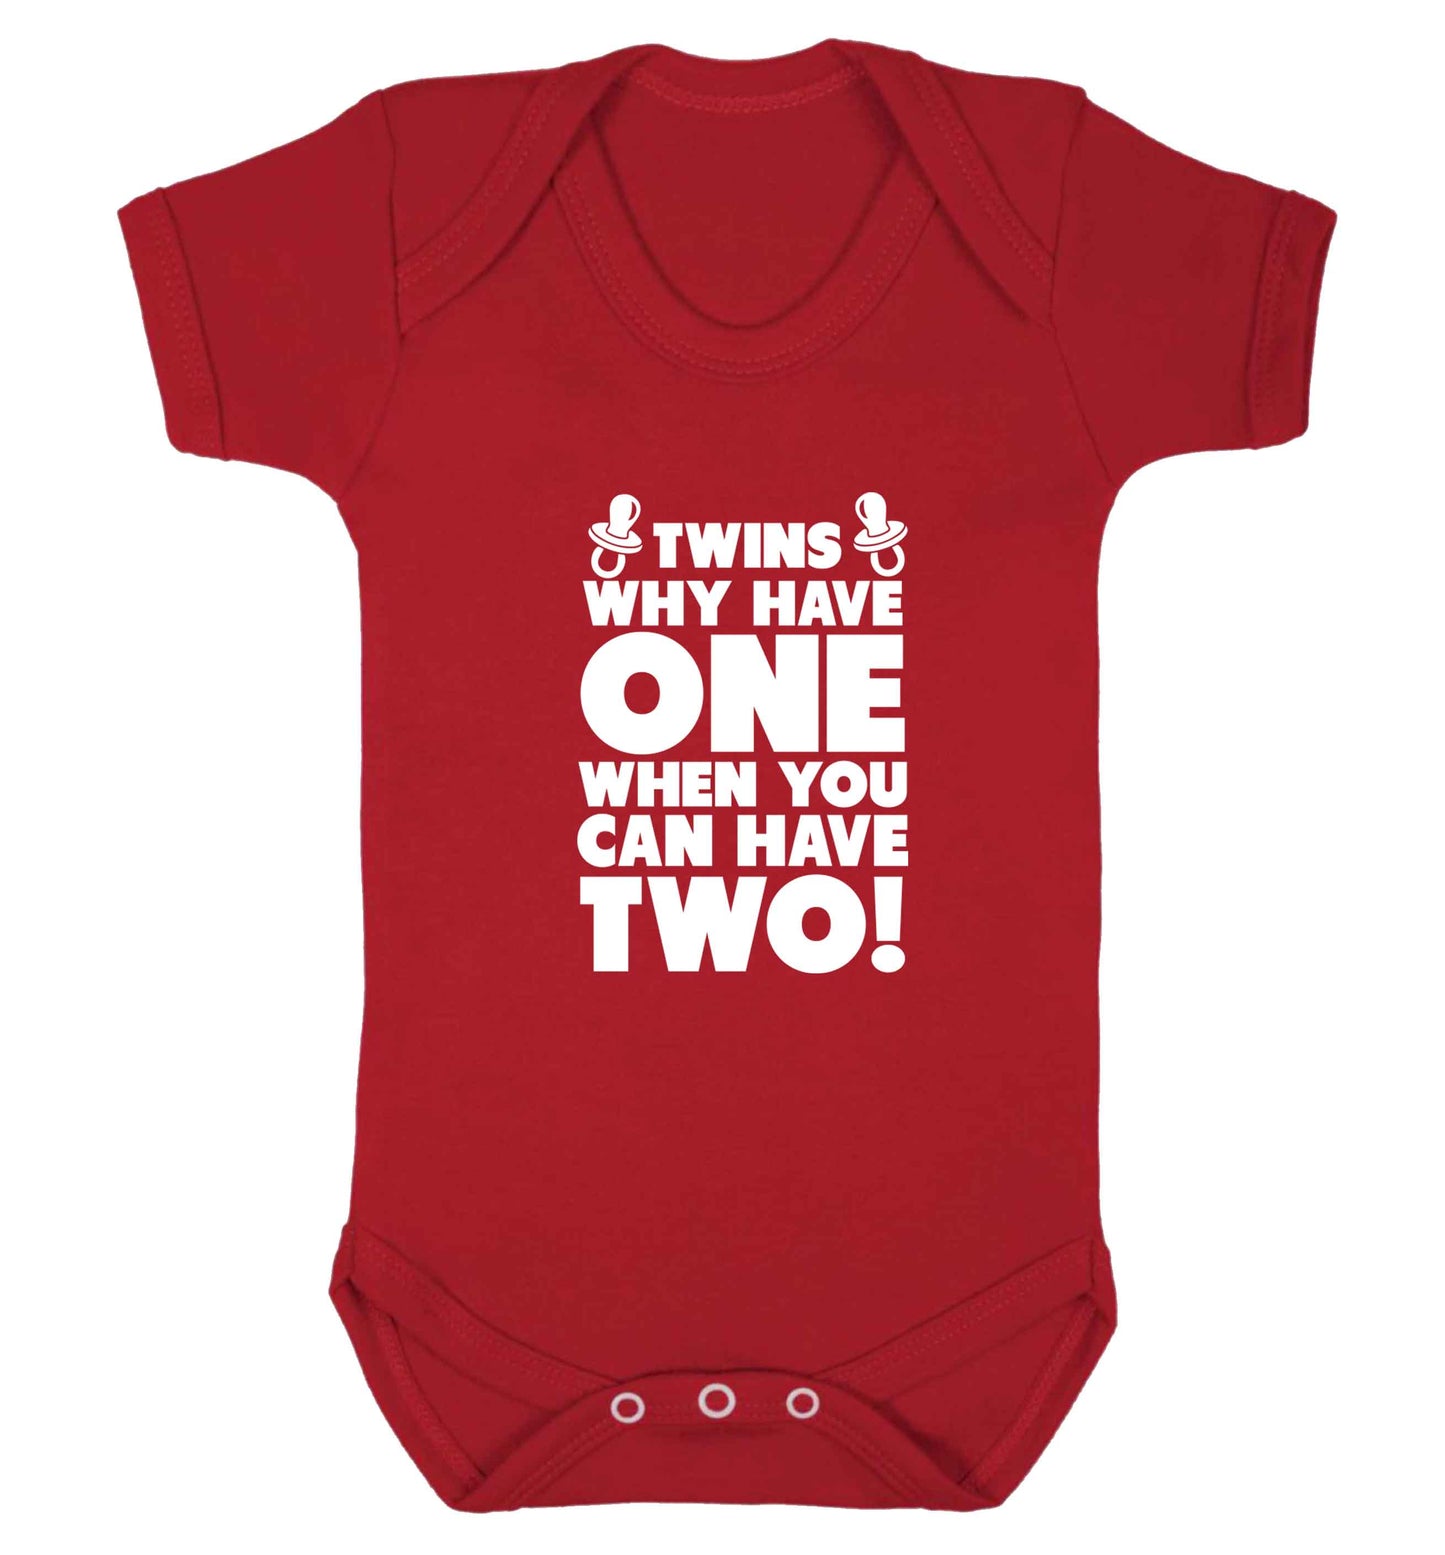 Twins why have one when you can have two baby vest red 18-24 months